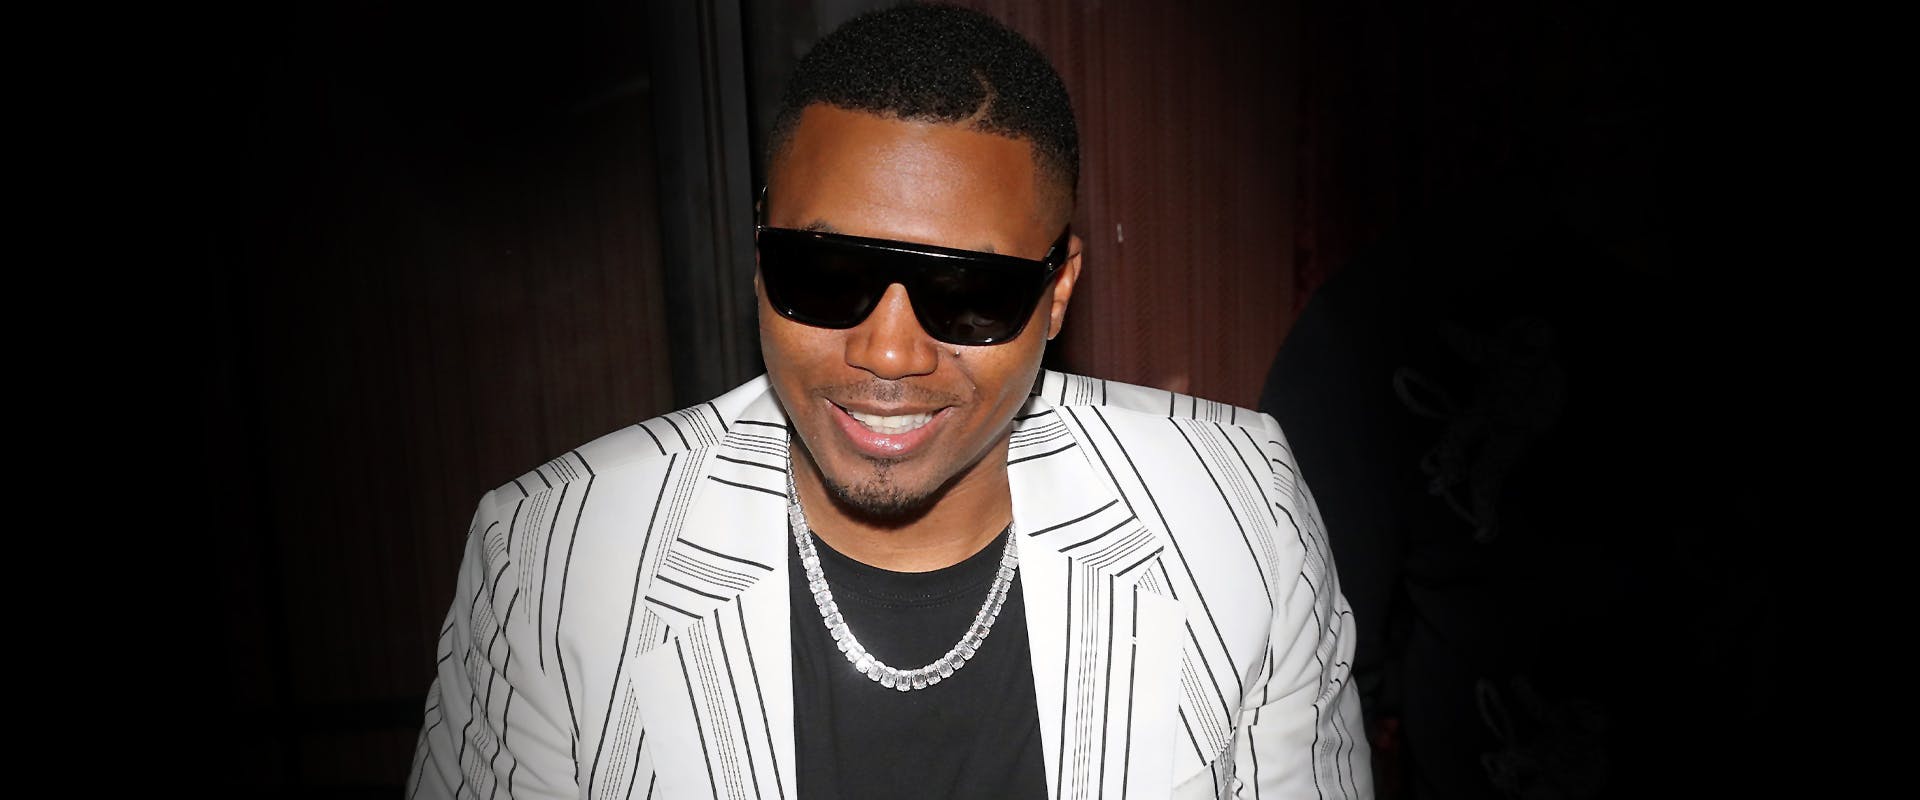 Nas celebrates his birthday with dinner at Catch on September 14, 2020 in New York City.